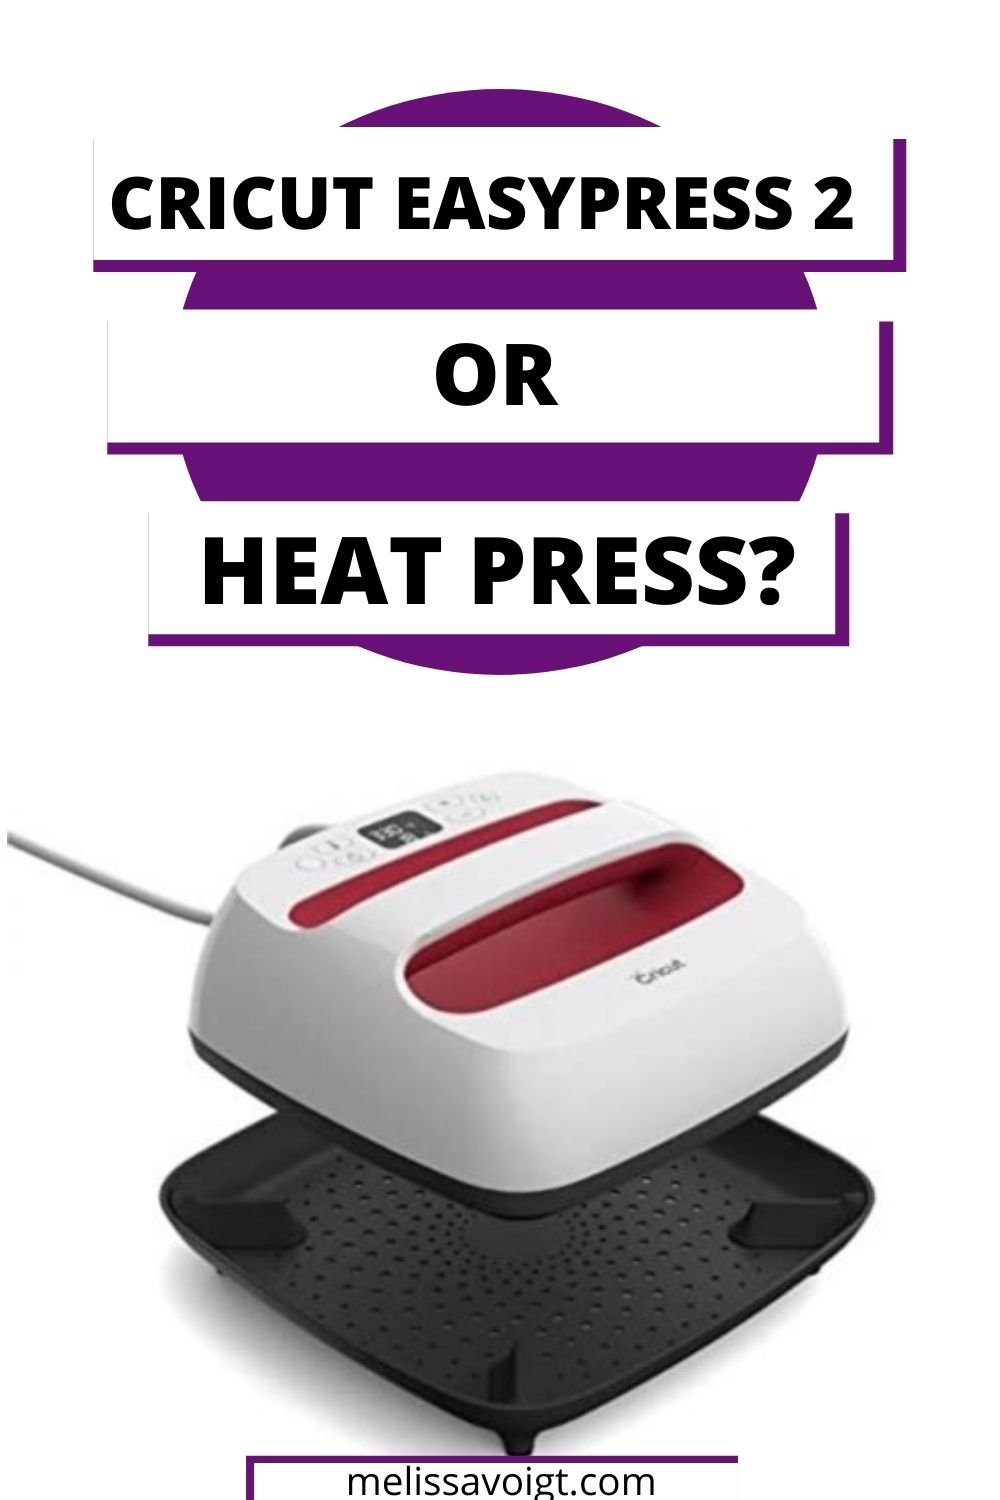 How to Use the EasyPress 2: Is it Really Necessary?